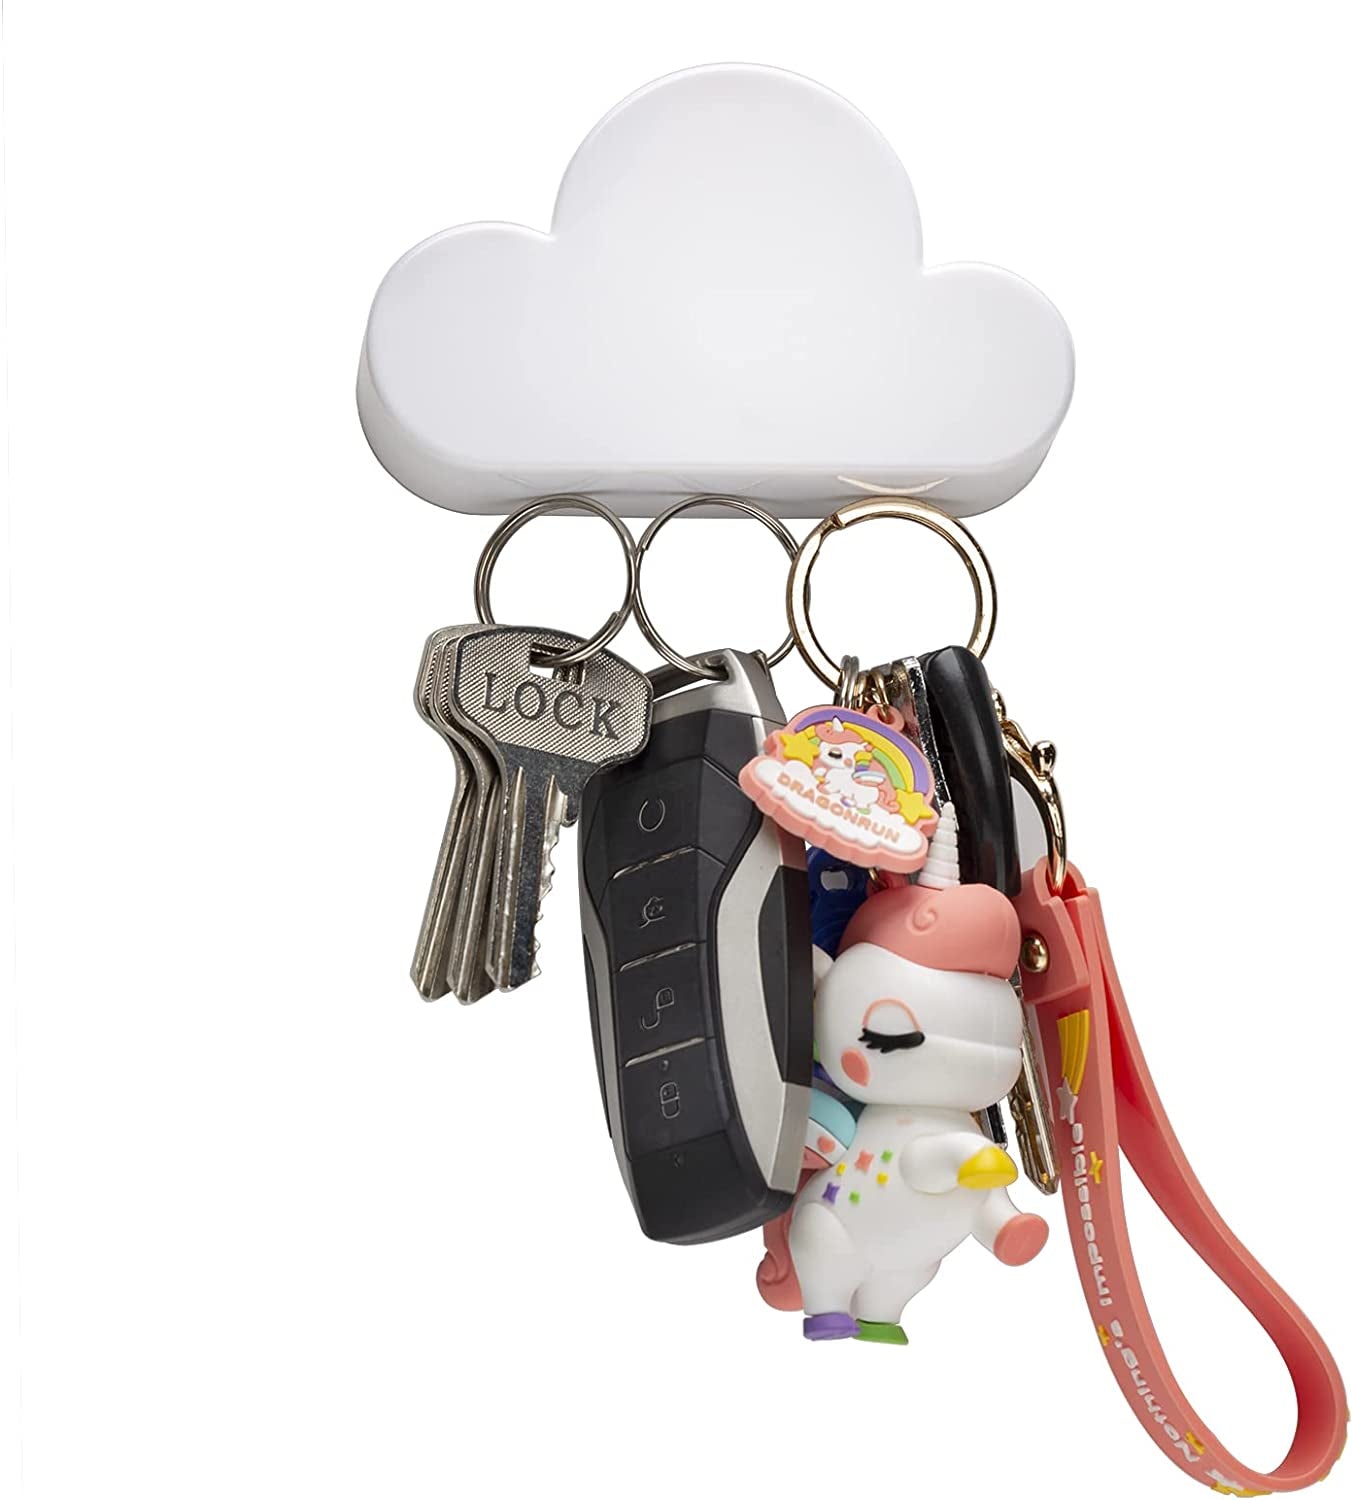 White Cloud Magnetic Key Holder for Wall - Novelty Adhesive Cute Key Hanger Organizer, Easy to Mount - Powerful Magnets Keep Keychains and Loose Keys Securely in Place